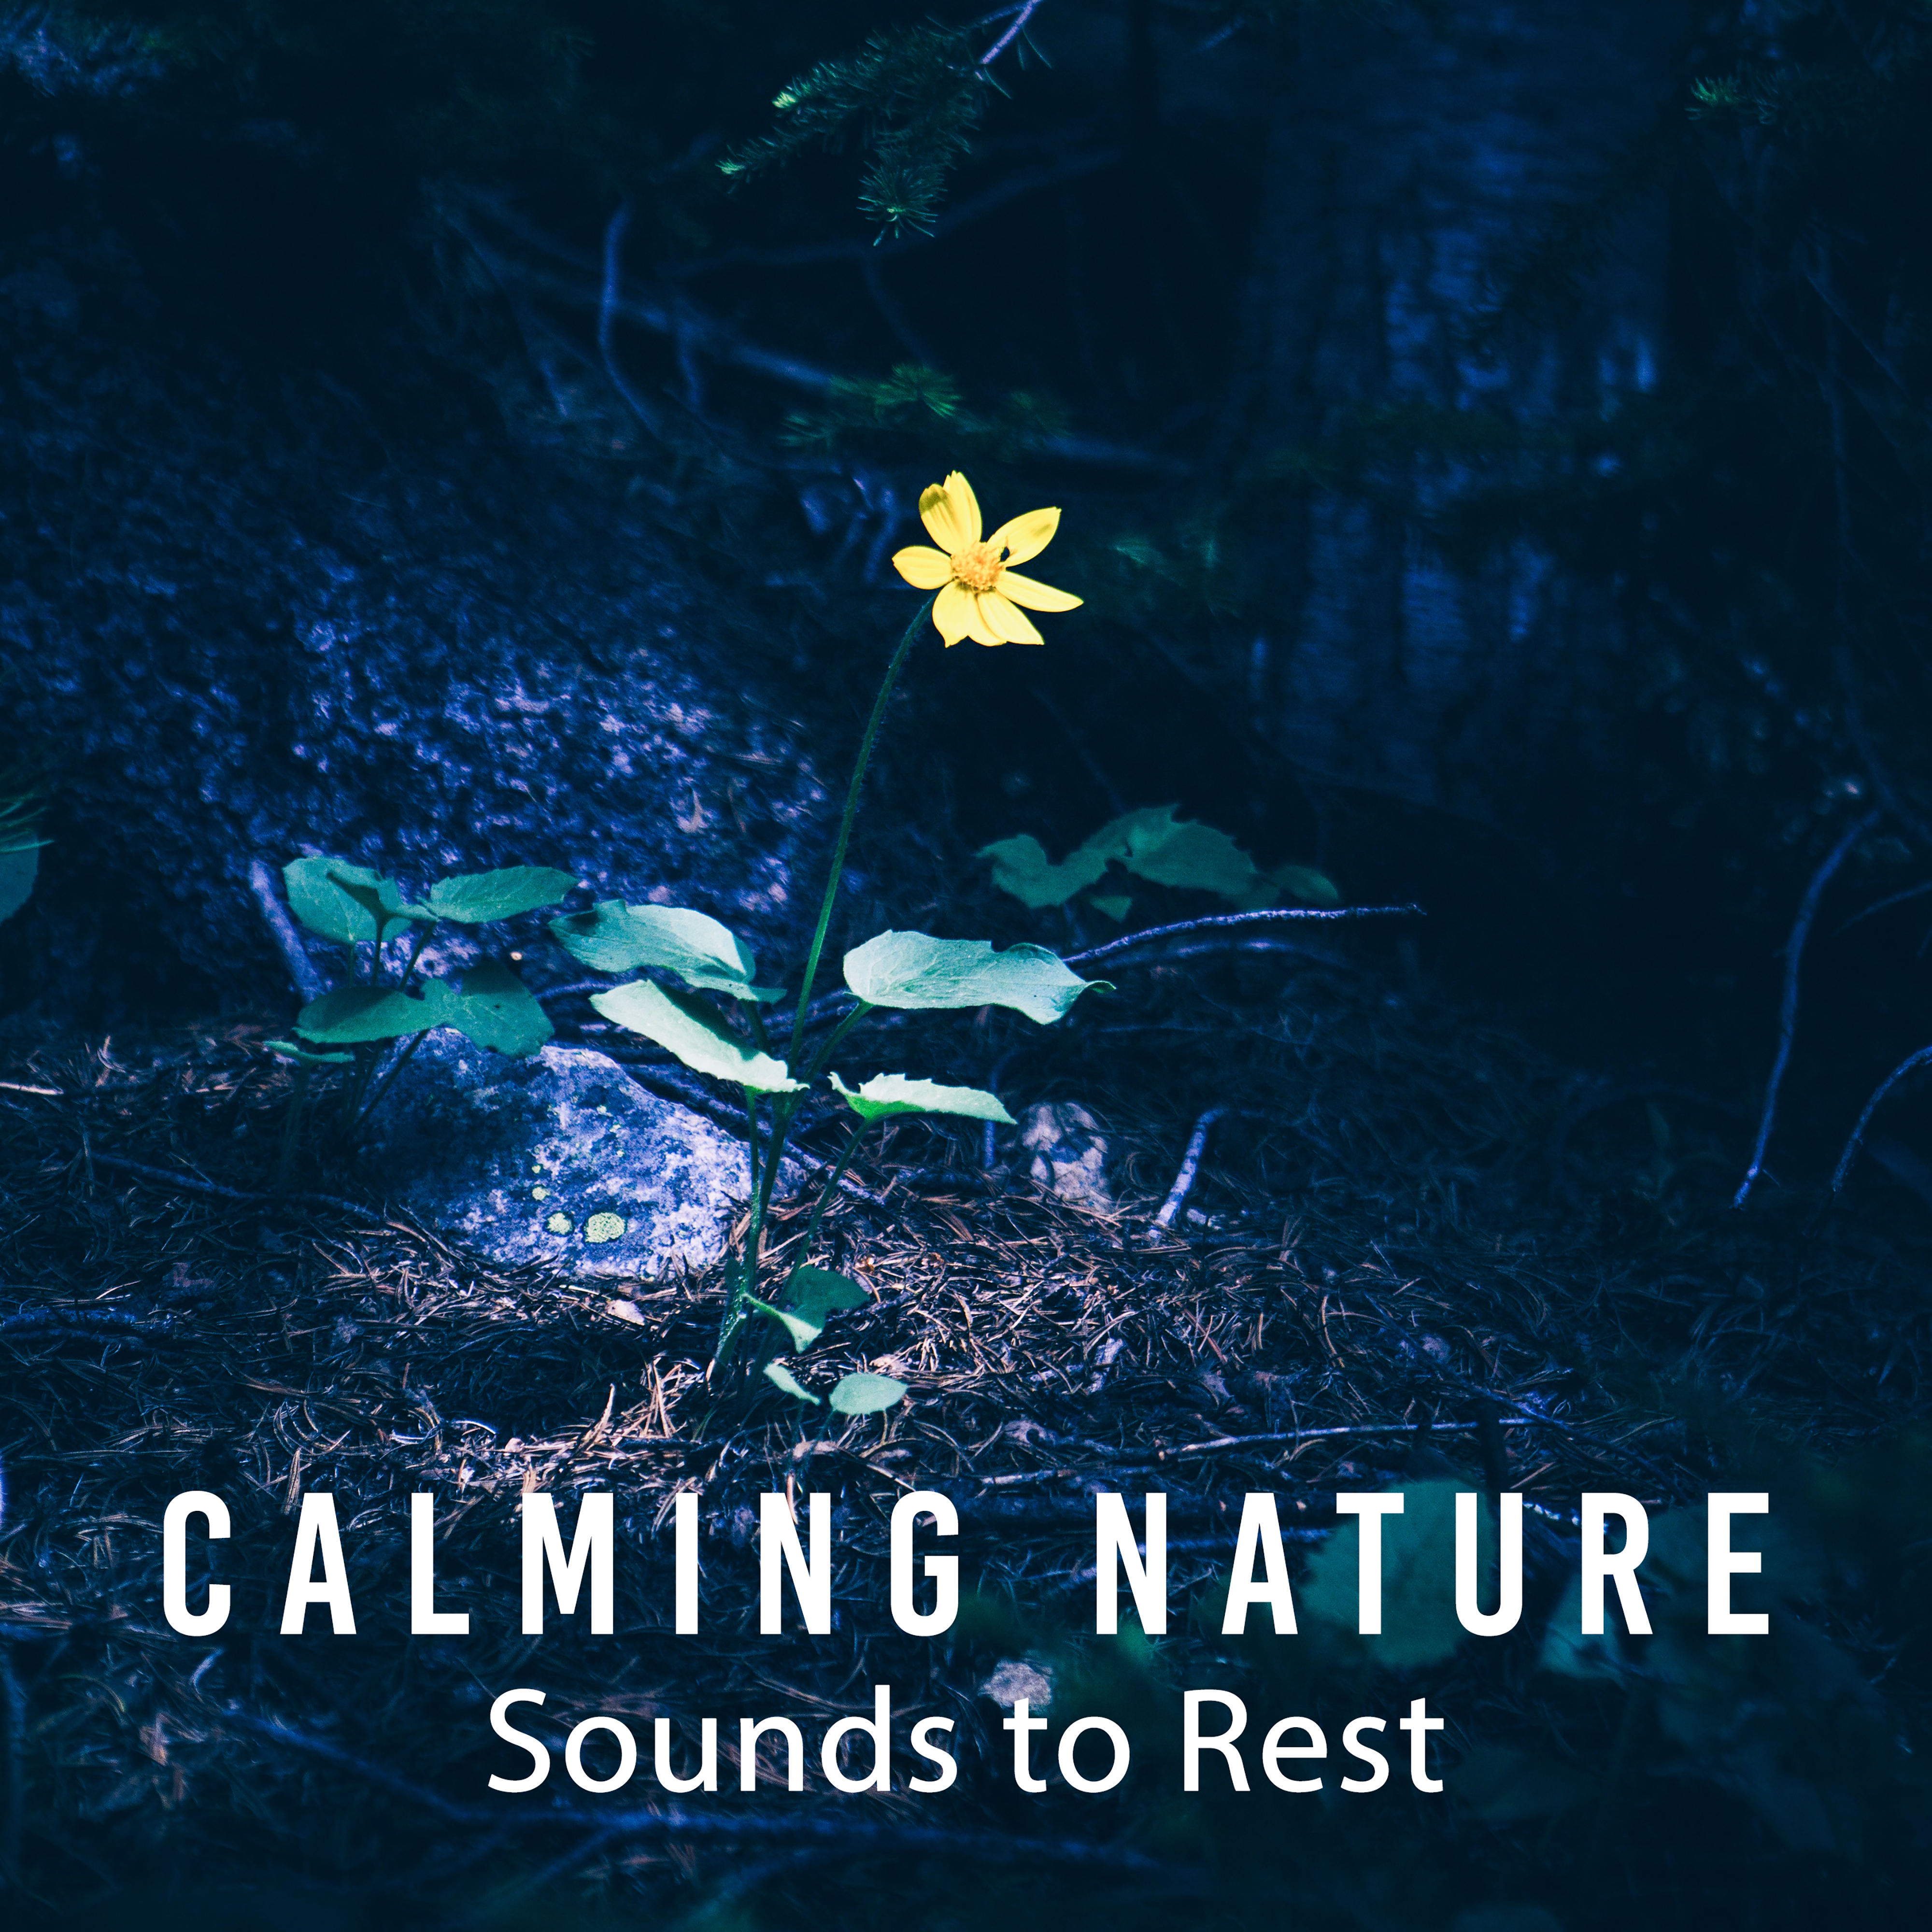 Calming Nature Sounds to Rest – Chilled Moments, Beautiful Nature Music, Sounds to Rest & Relax, New Age Healing Music